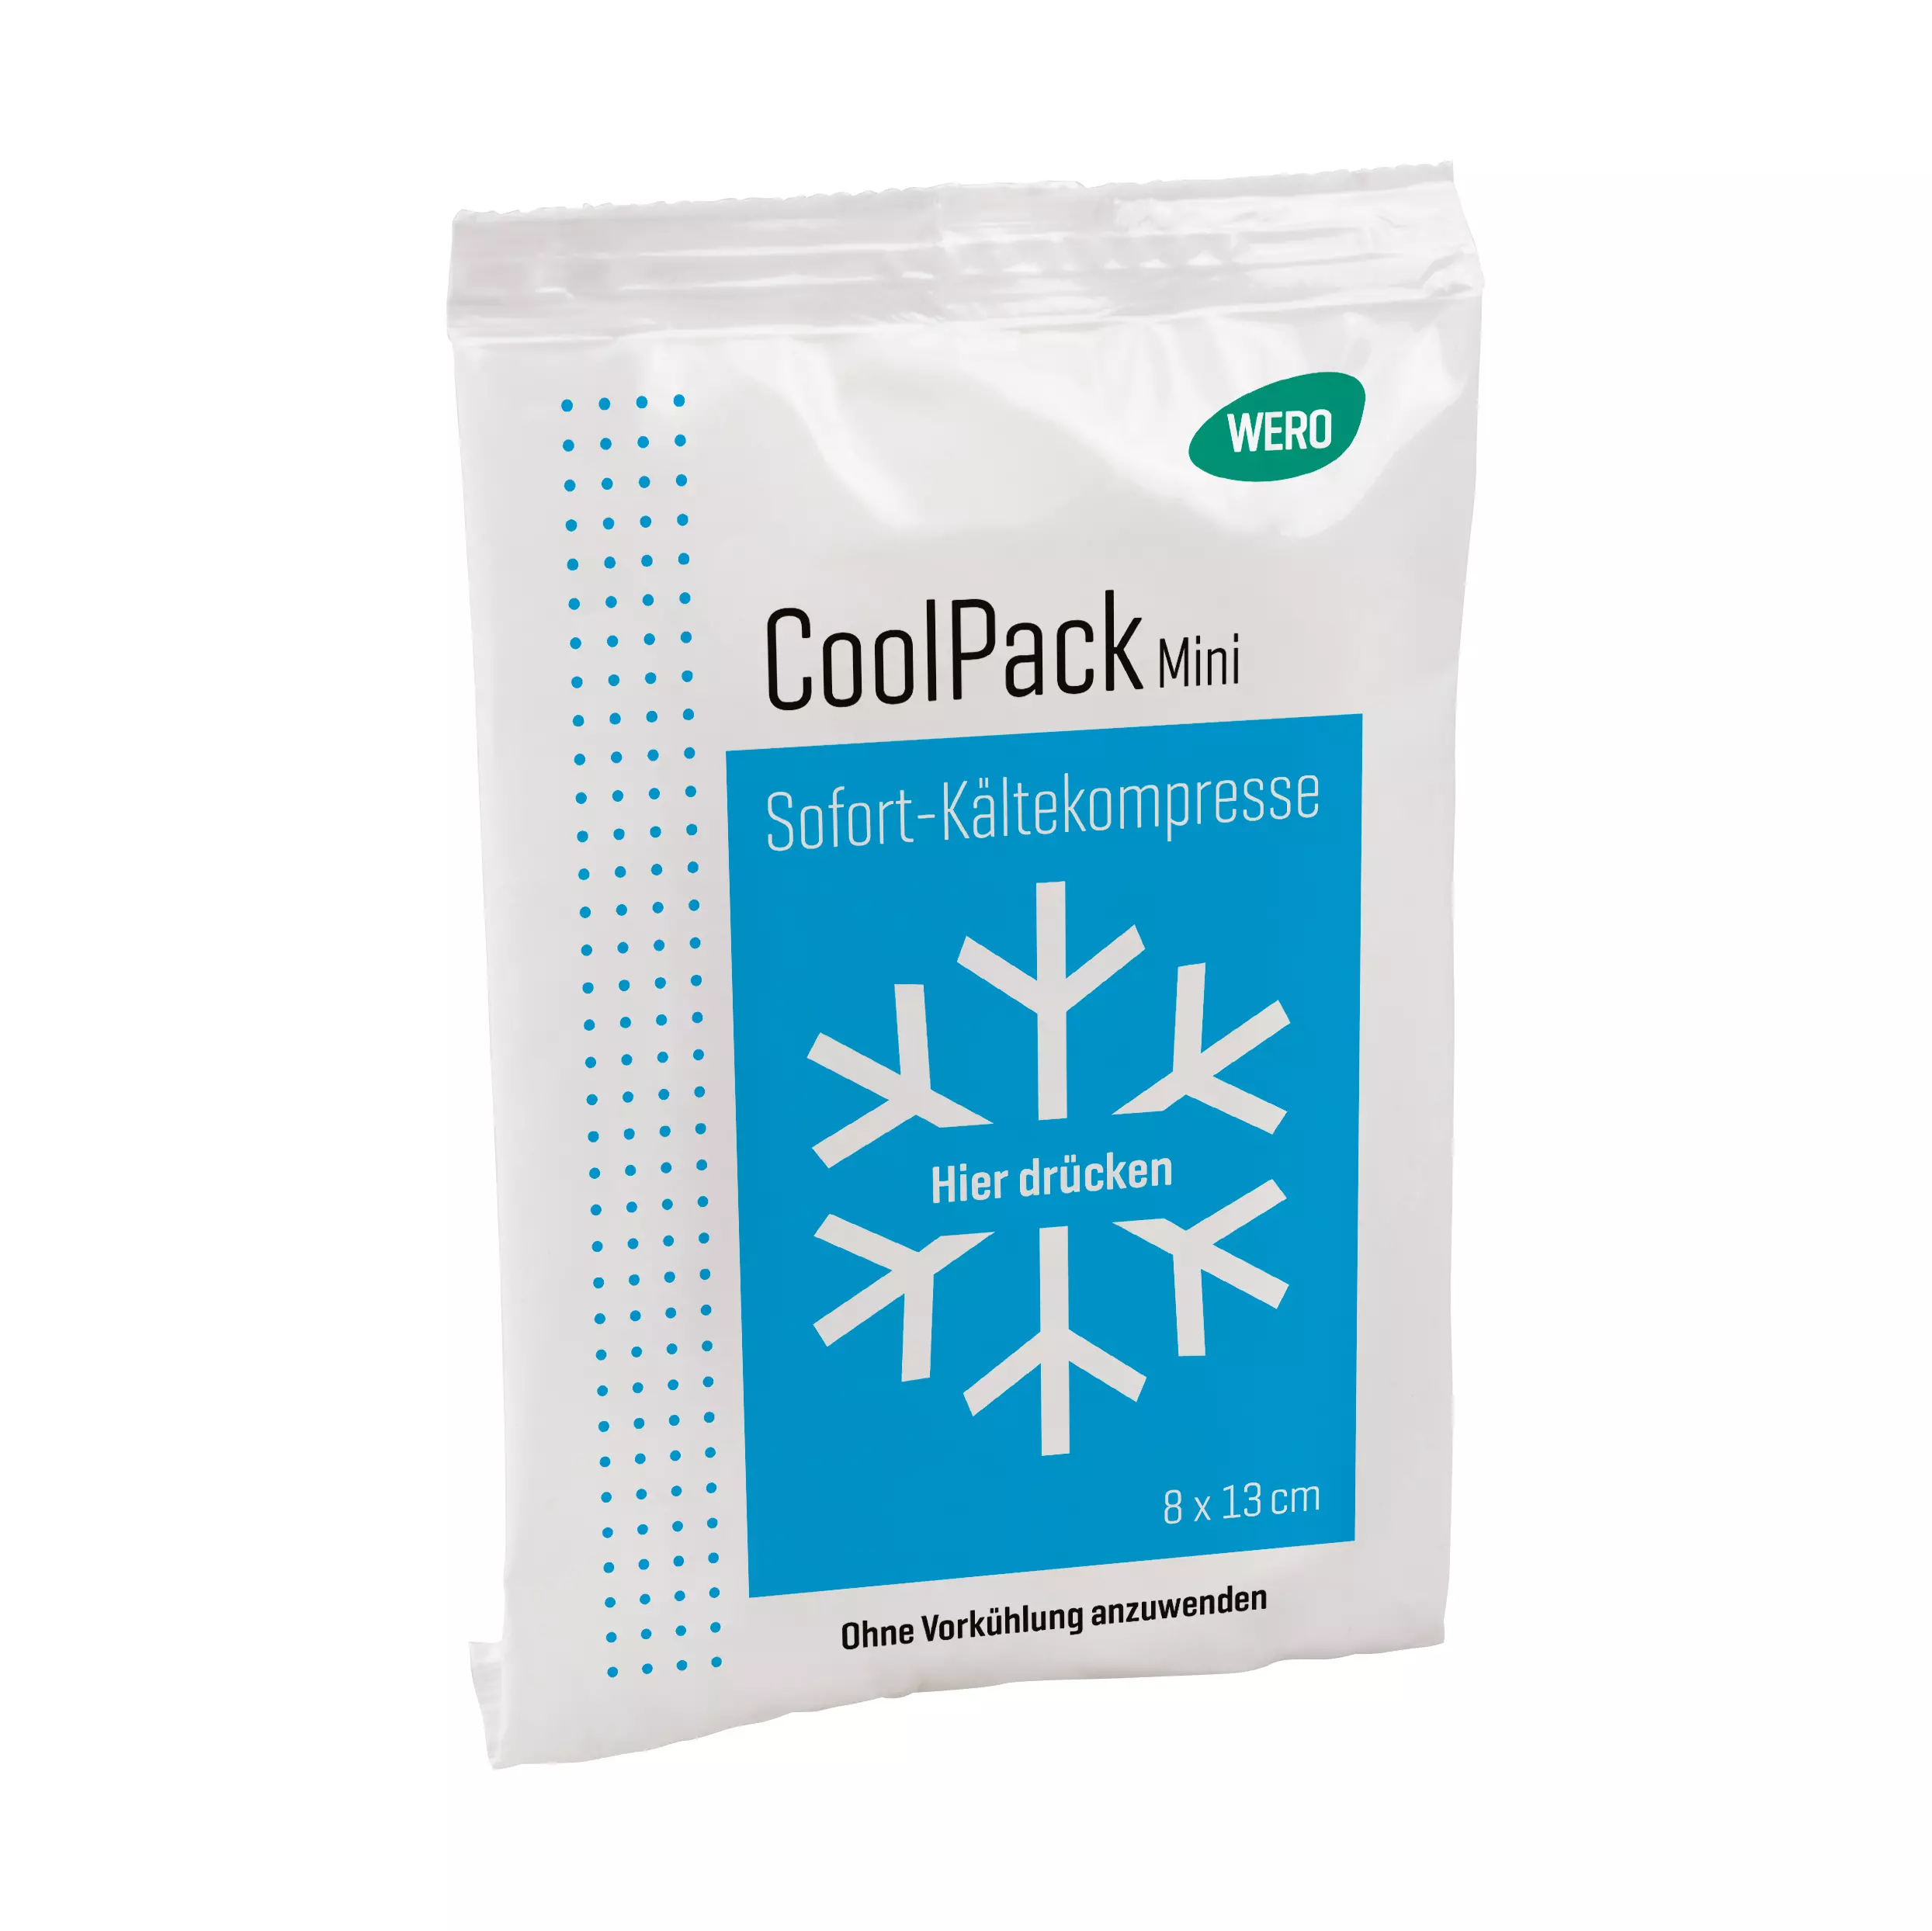 WERO CoolPack instant cold pack - Mini, 1 pc